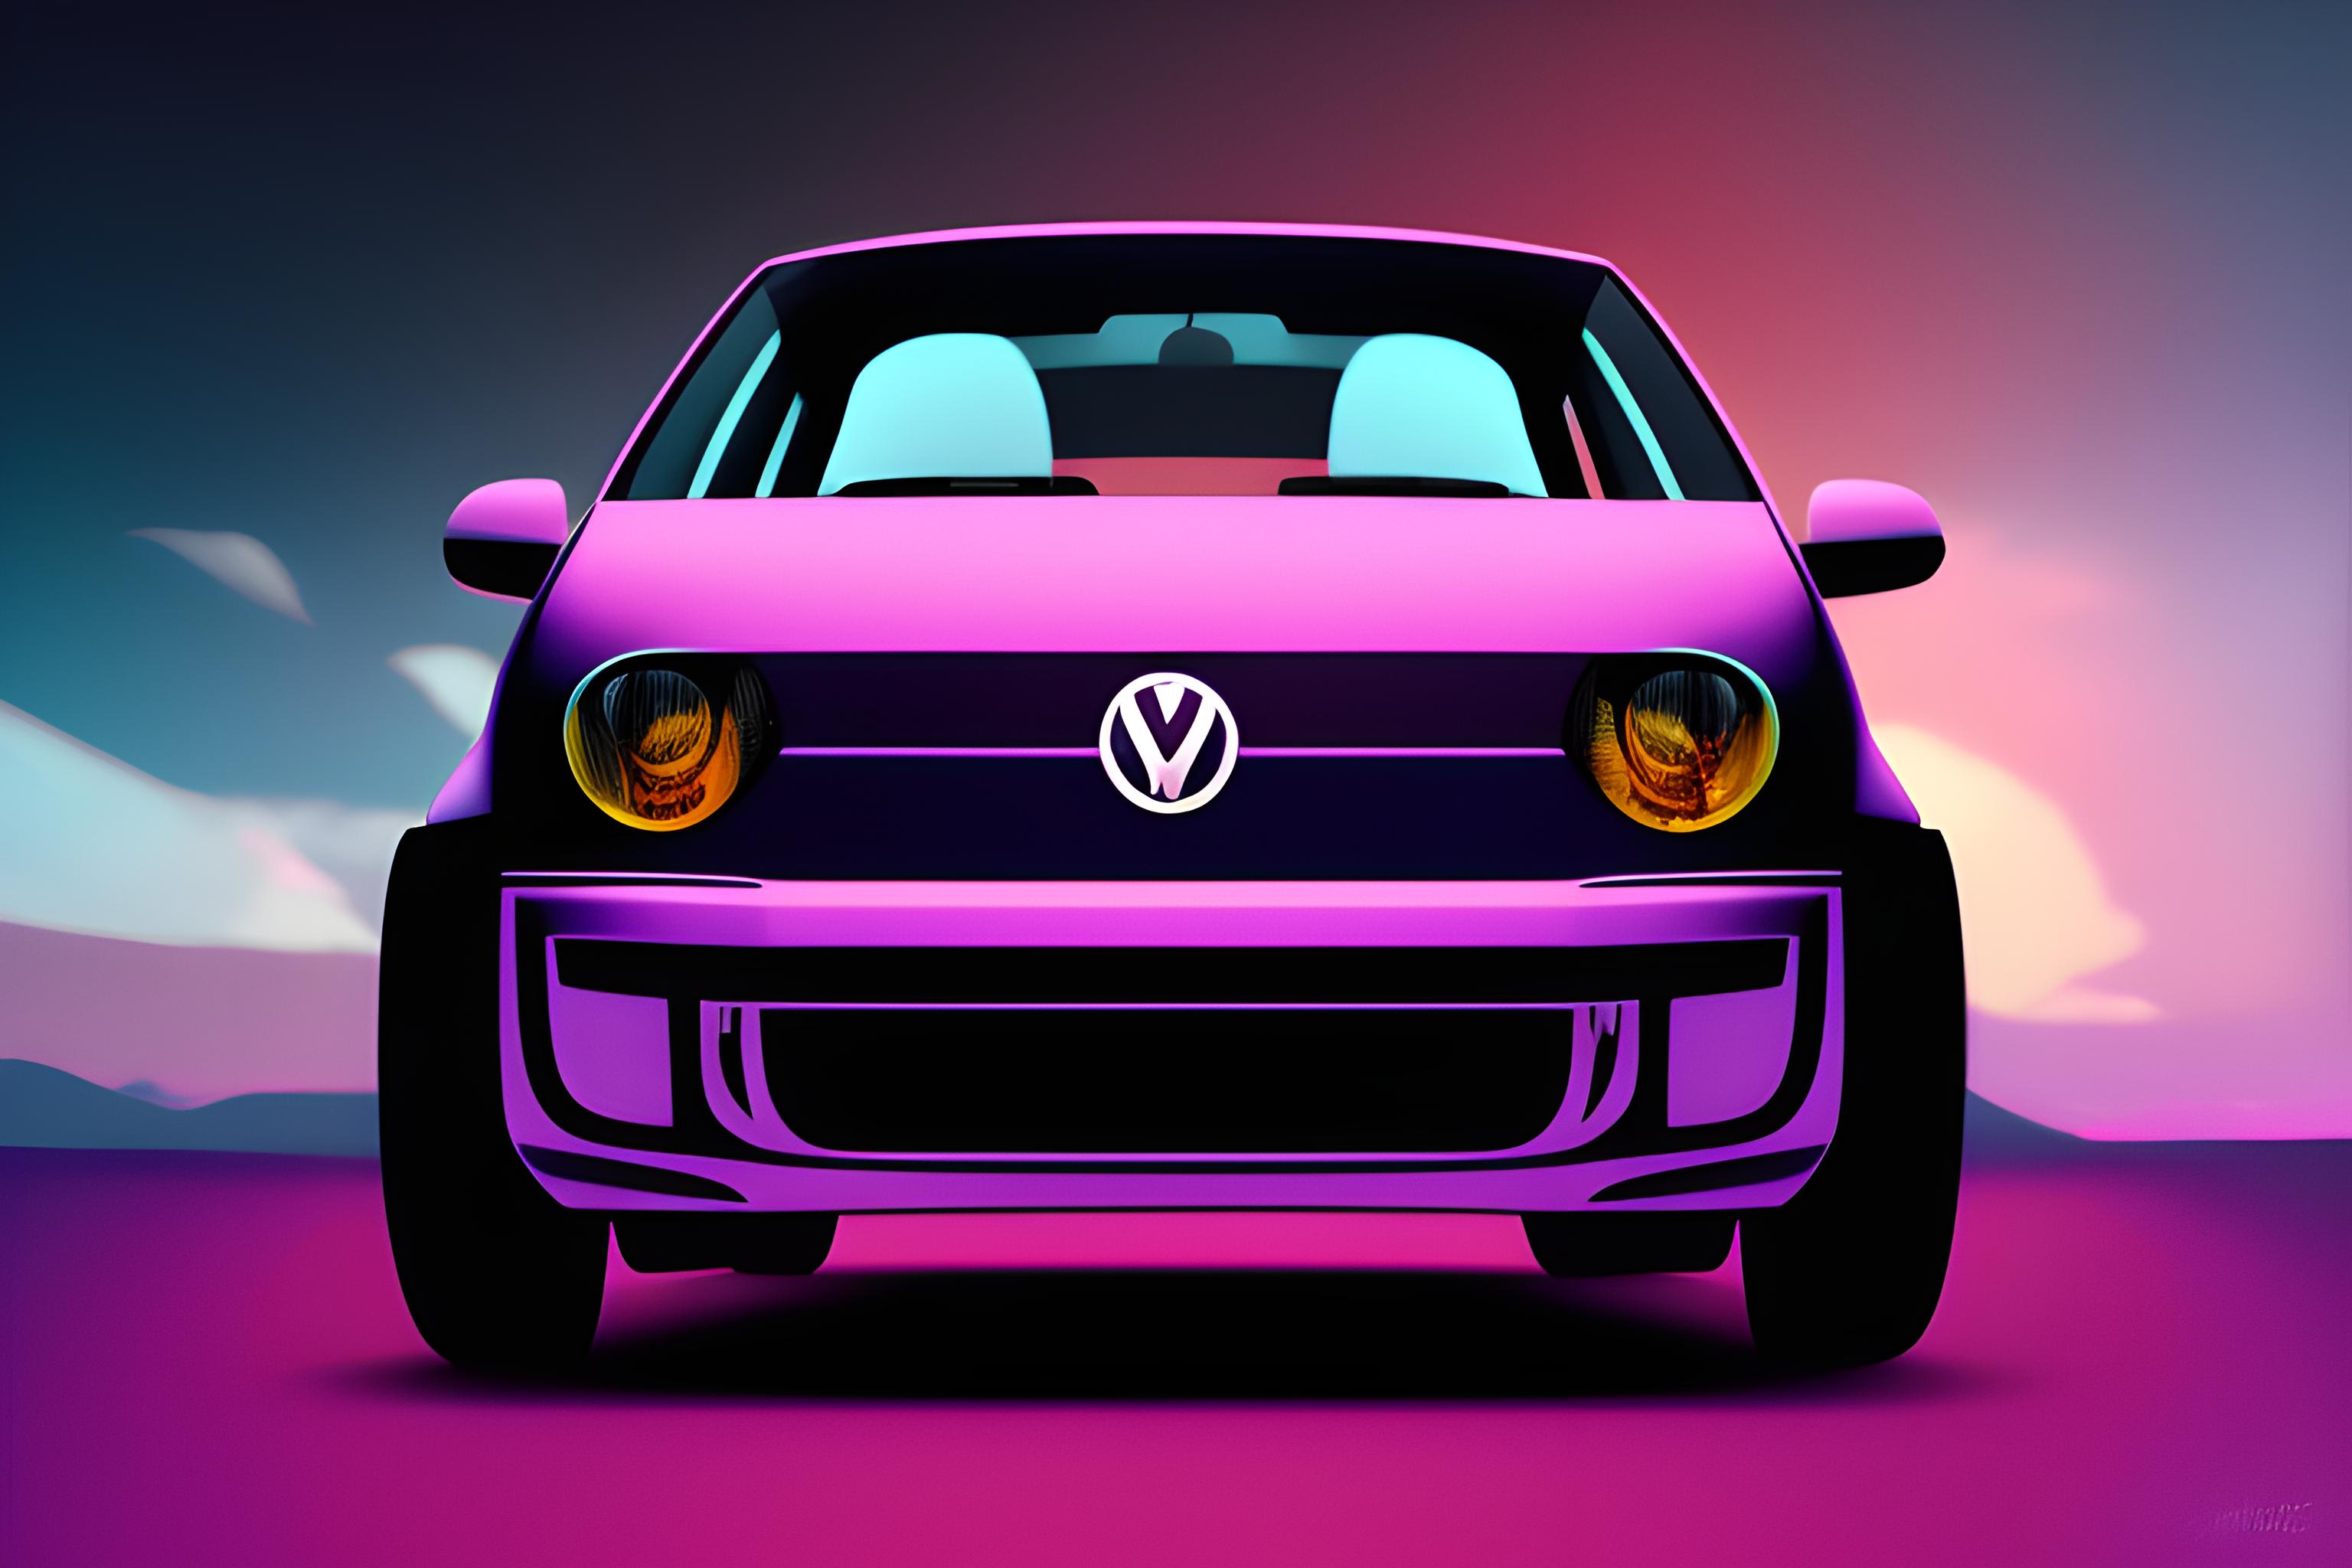 synthwave style volkswagen Lupo 2005 with round headlights and netherlands  license plate 99-pz-pz